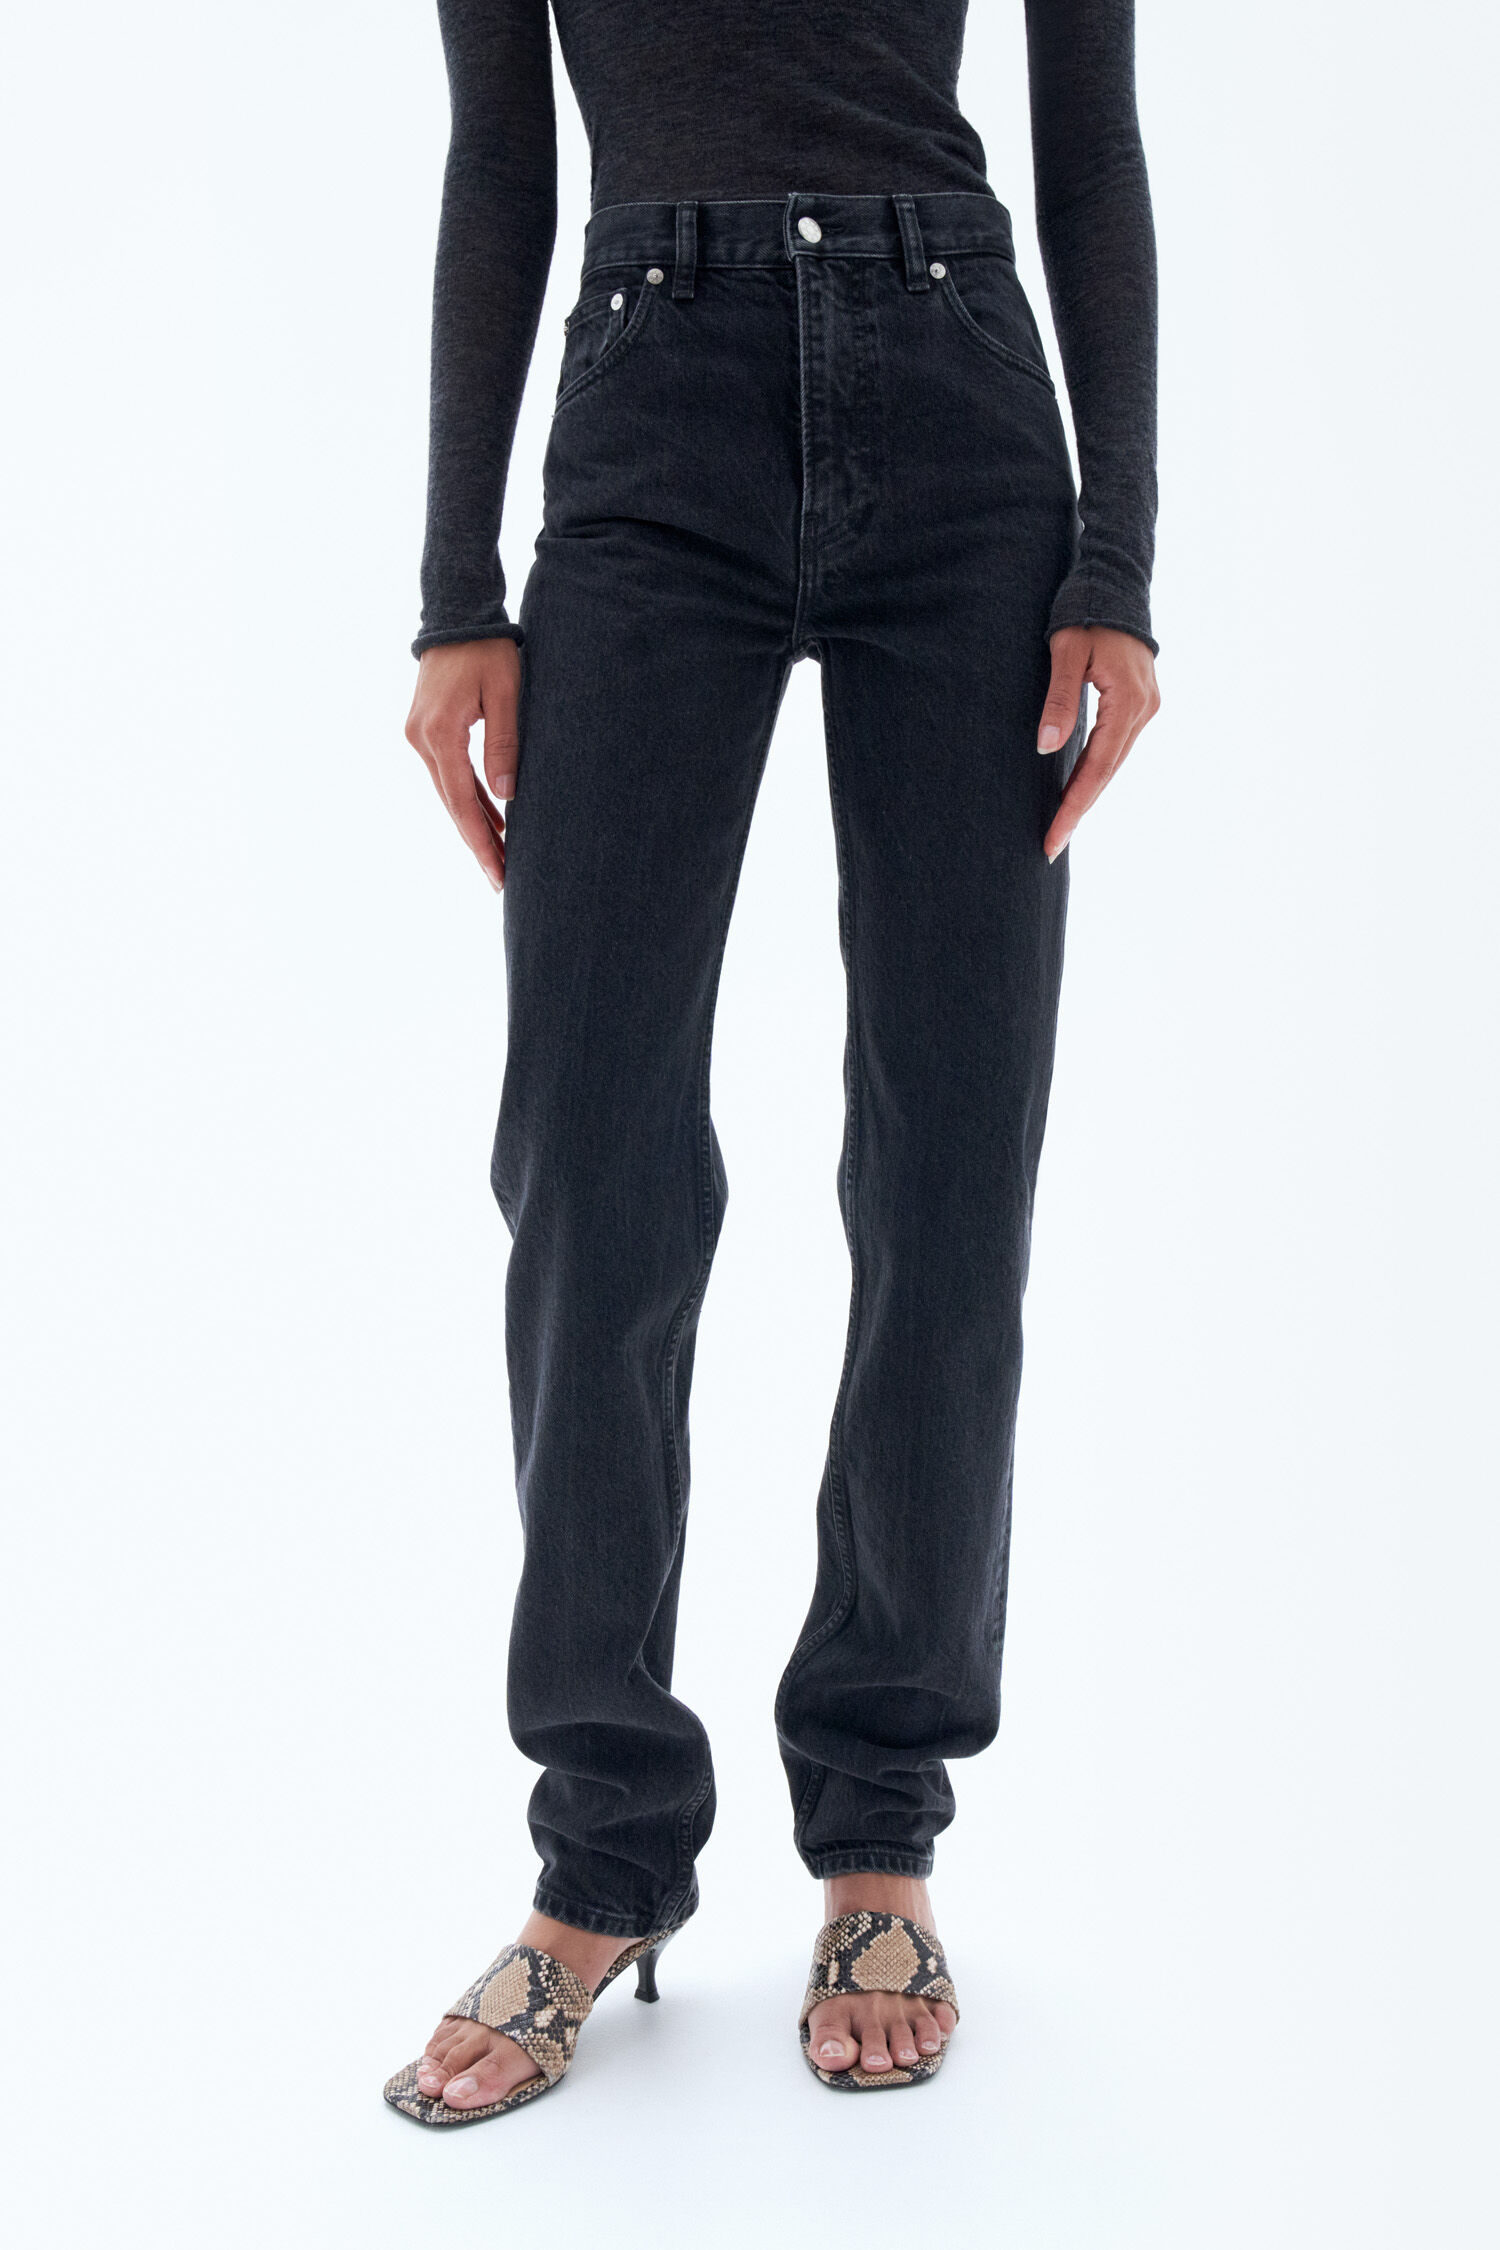 Tapered Jeans - Charcoal Black